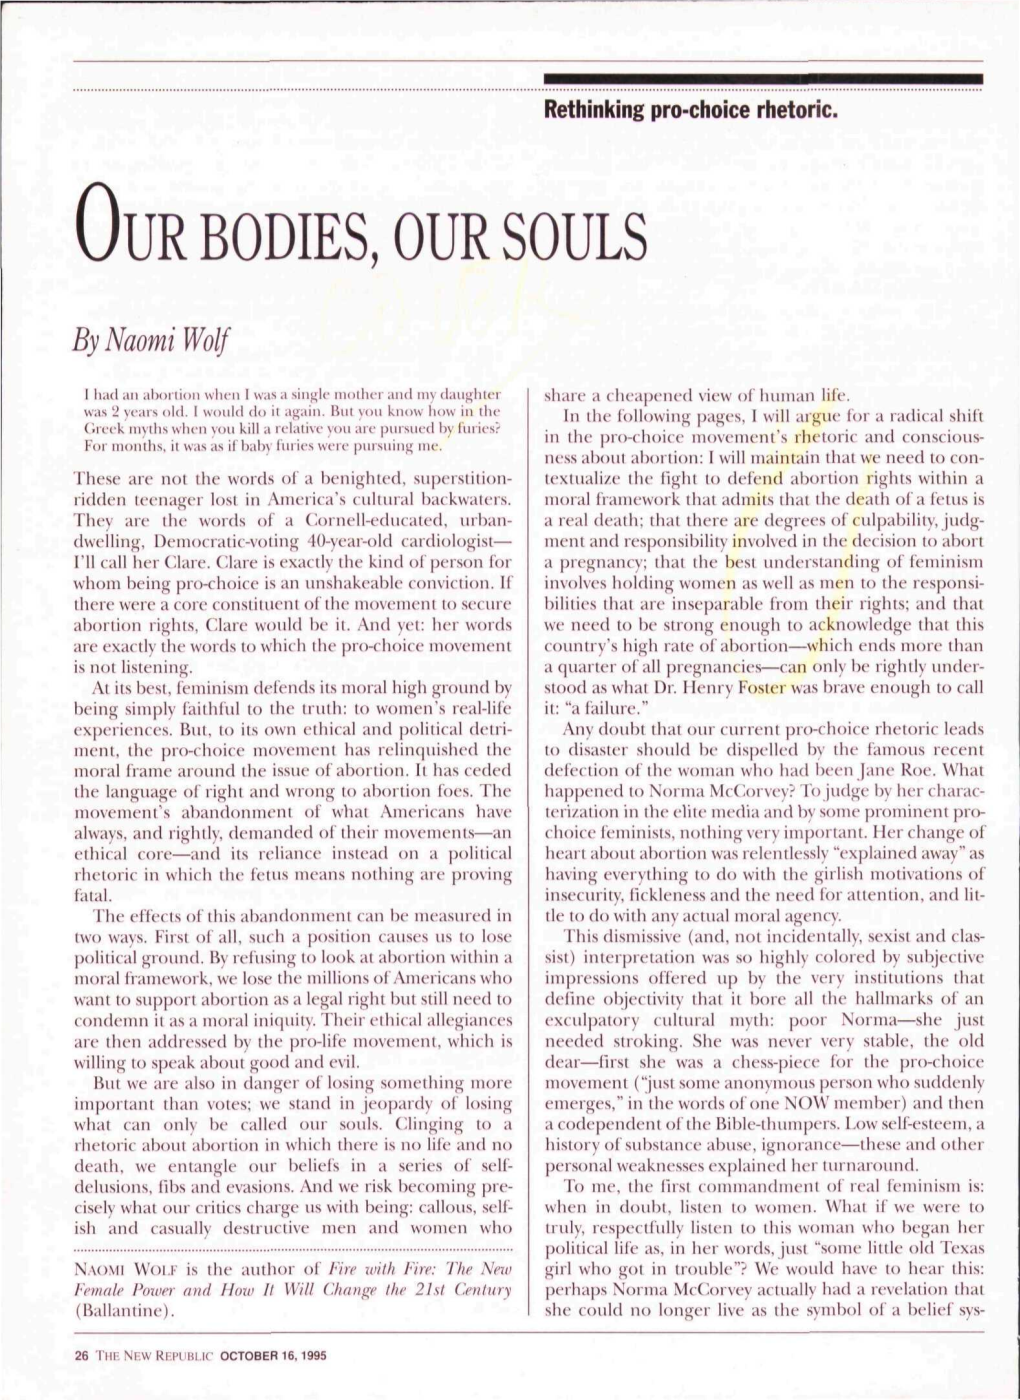 Our Bodies, Our Souls